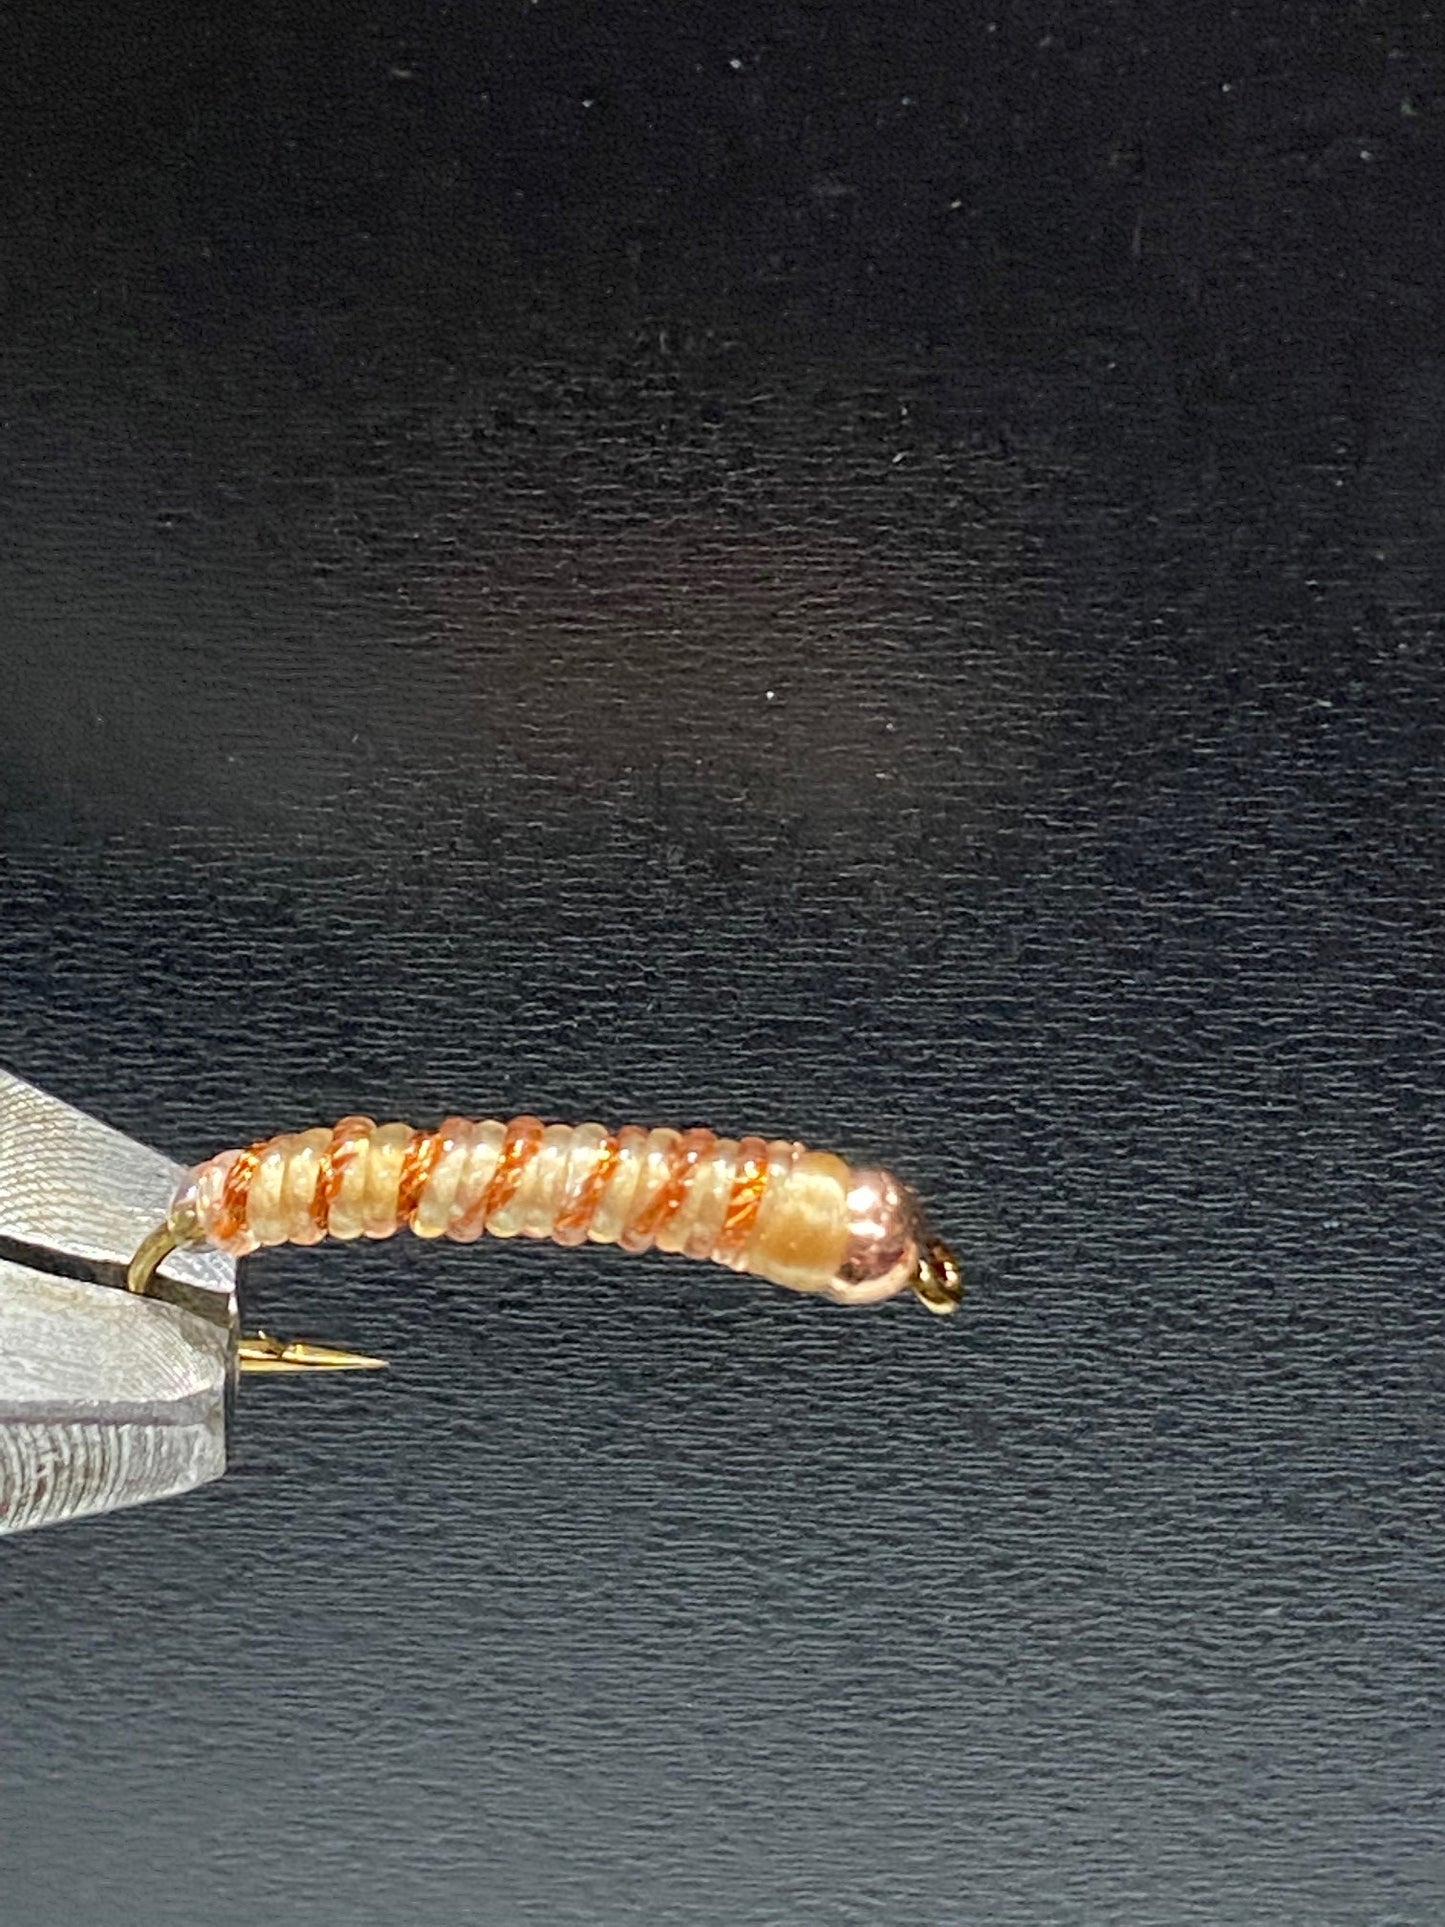 Meal Worm Fly